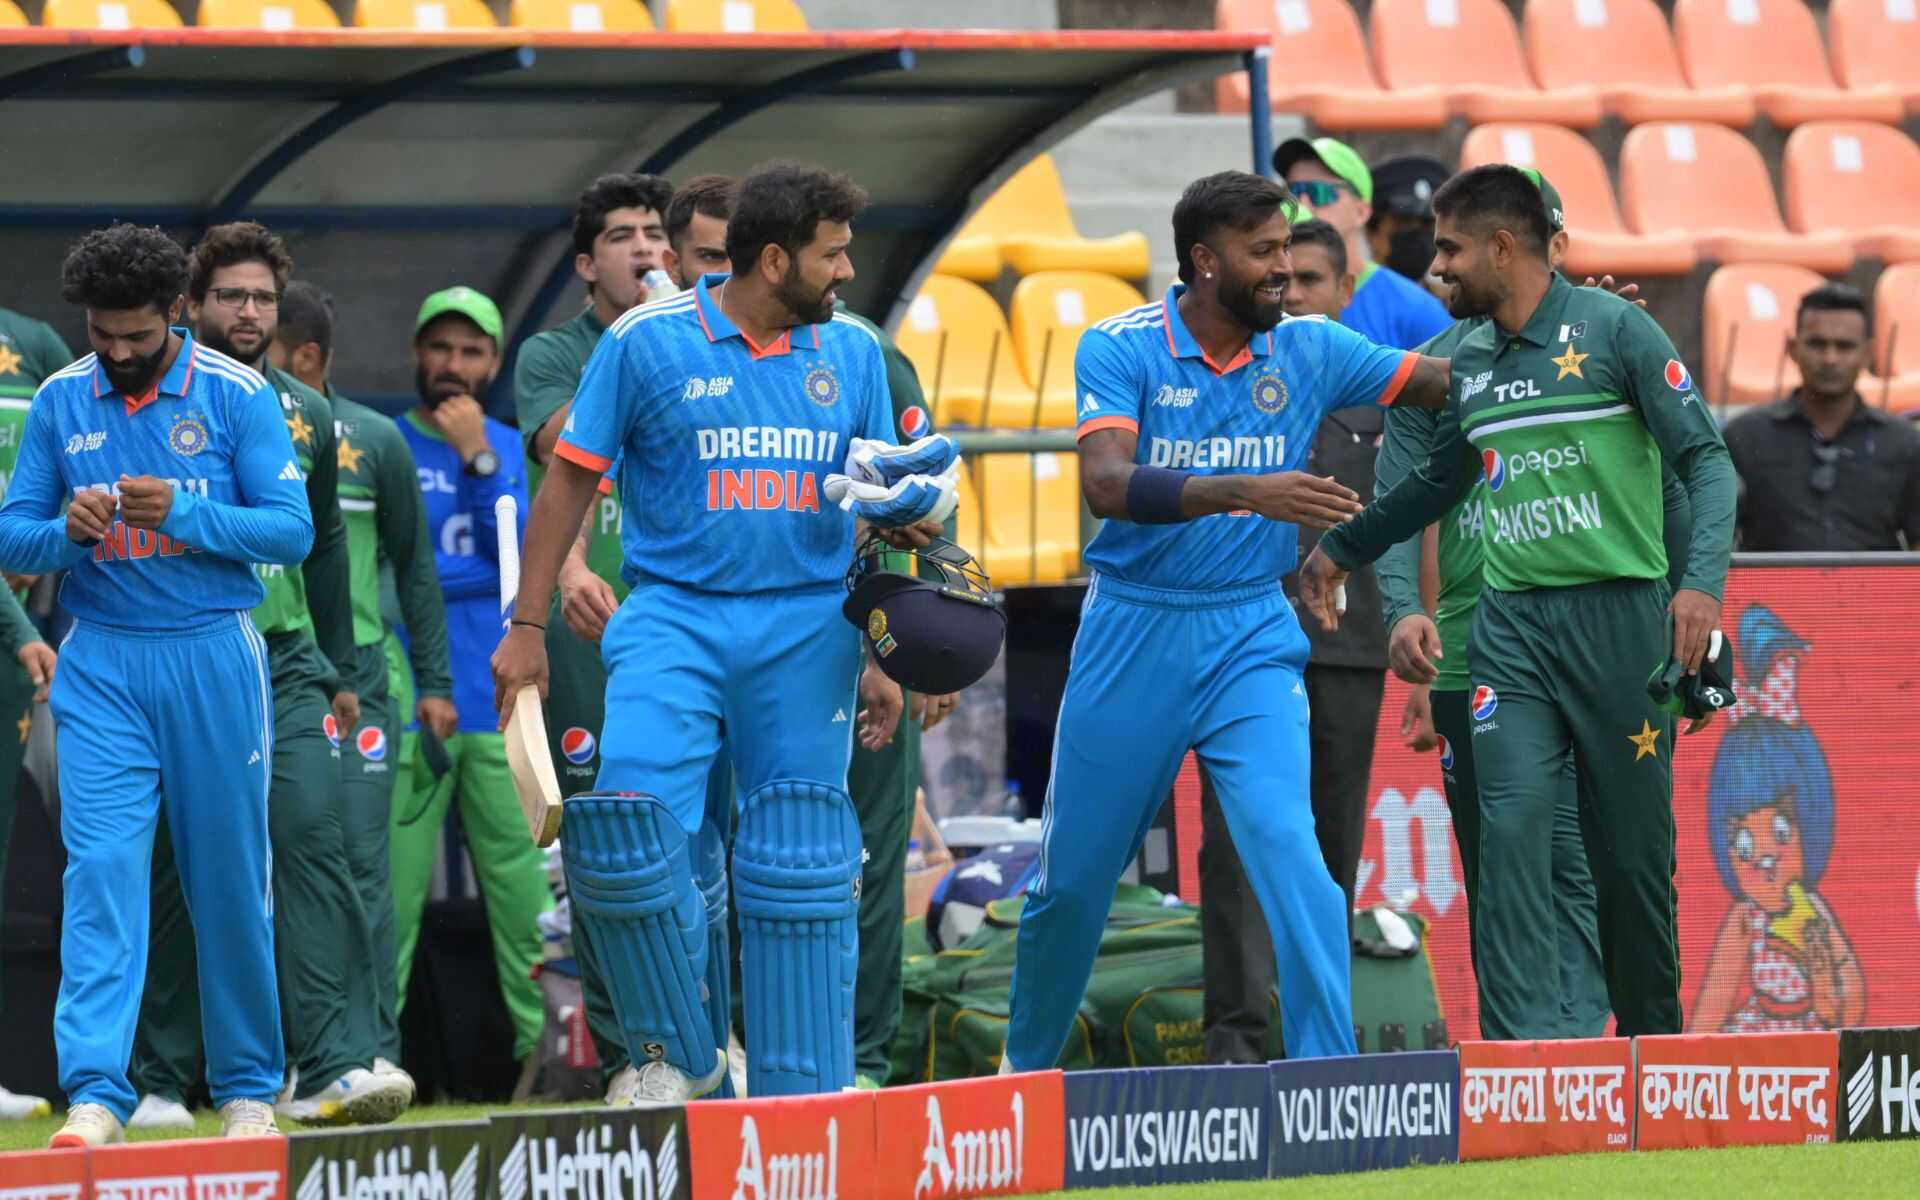 IND vs PAK is scheduled for June 9 in New York (x.com)